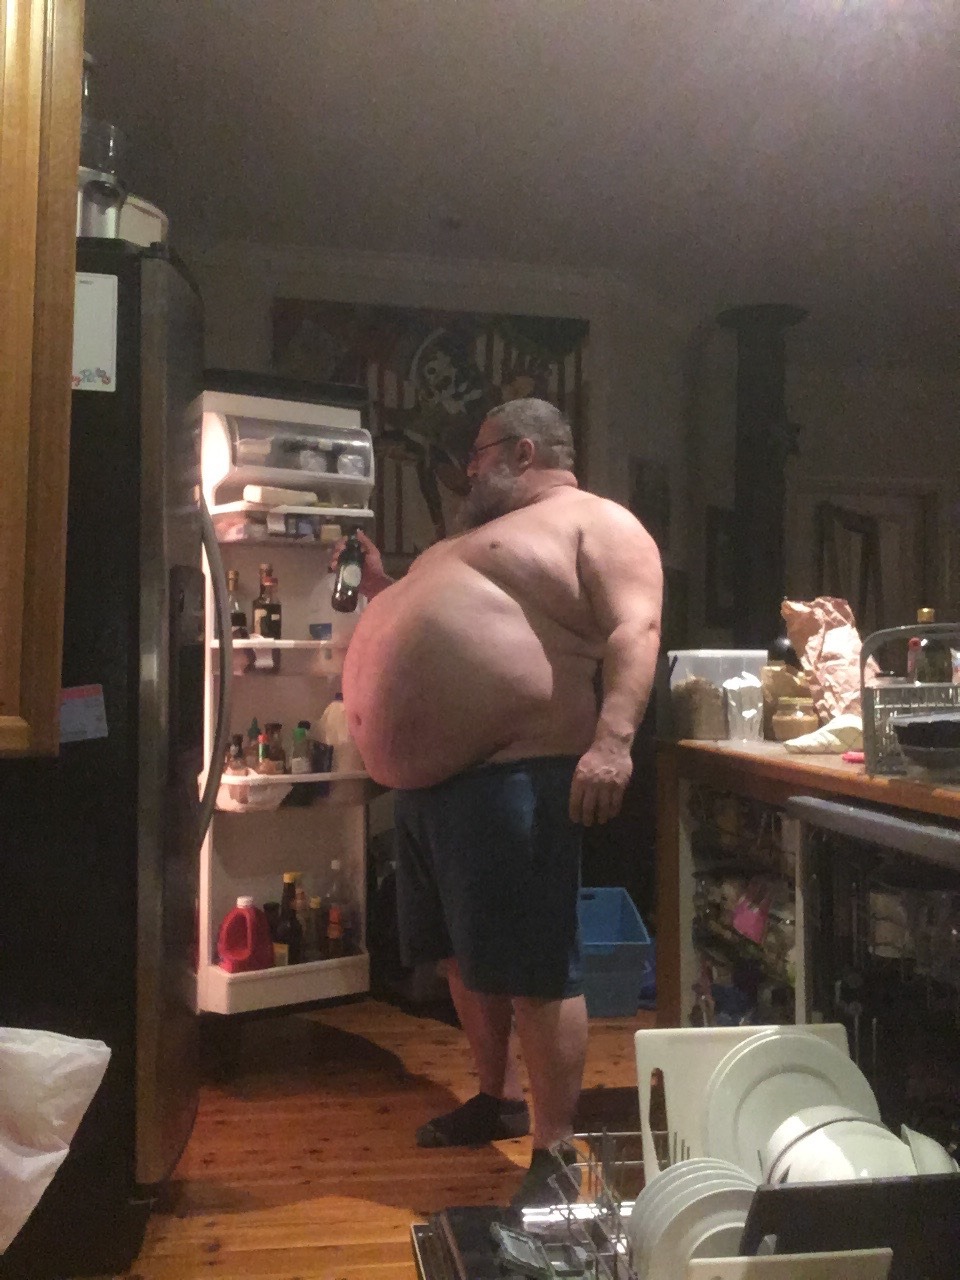 hogslob:I’m loving being at home working from the fridge